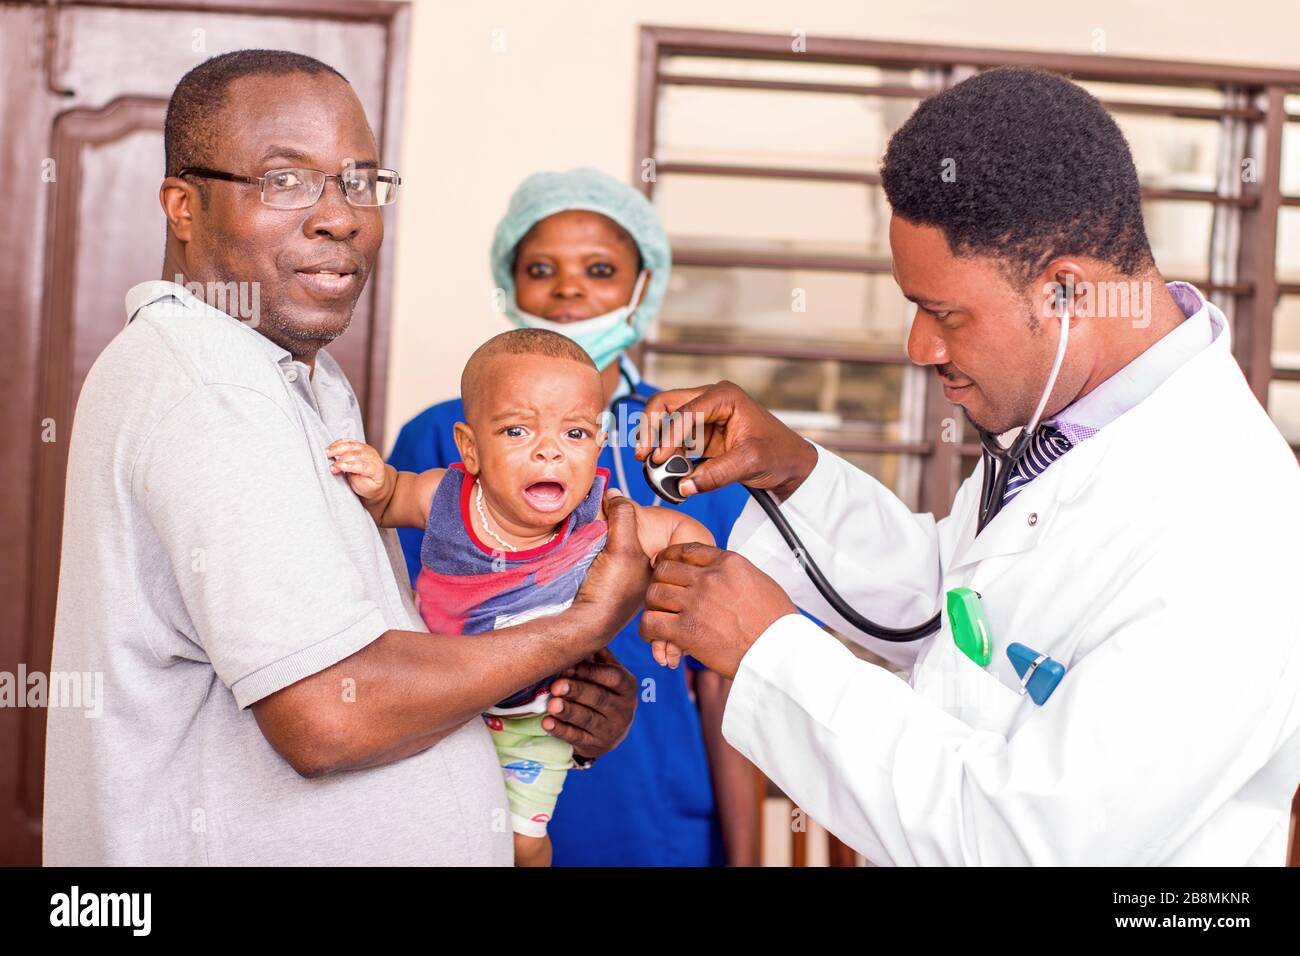 a young man catches his baby during the doctor examines him at the hospital. Stock Photo